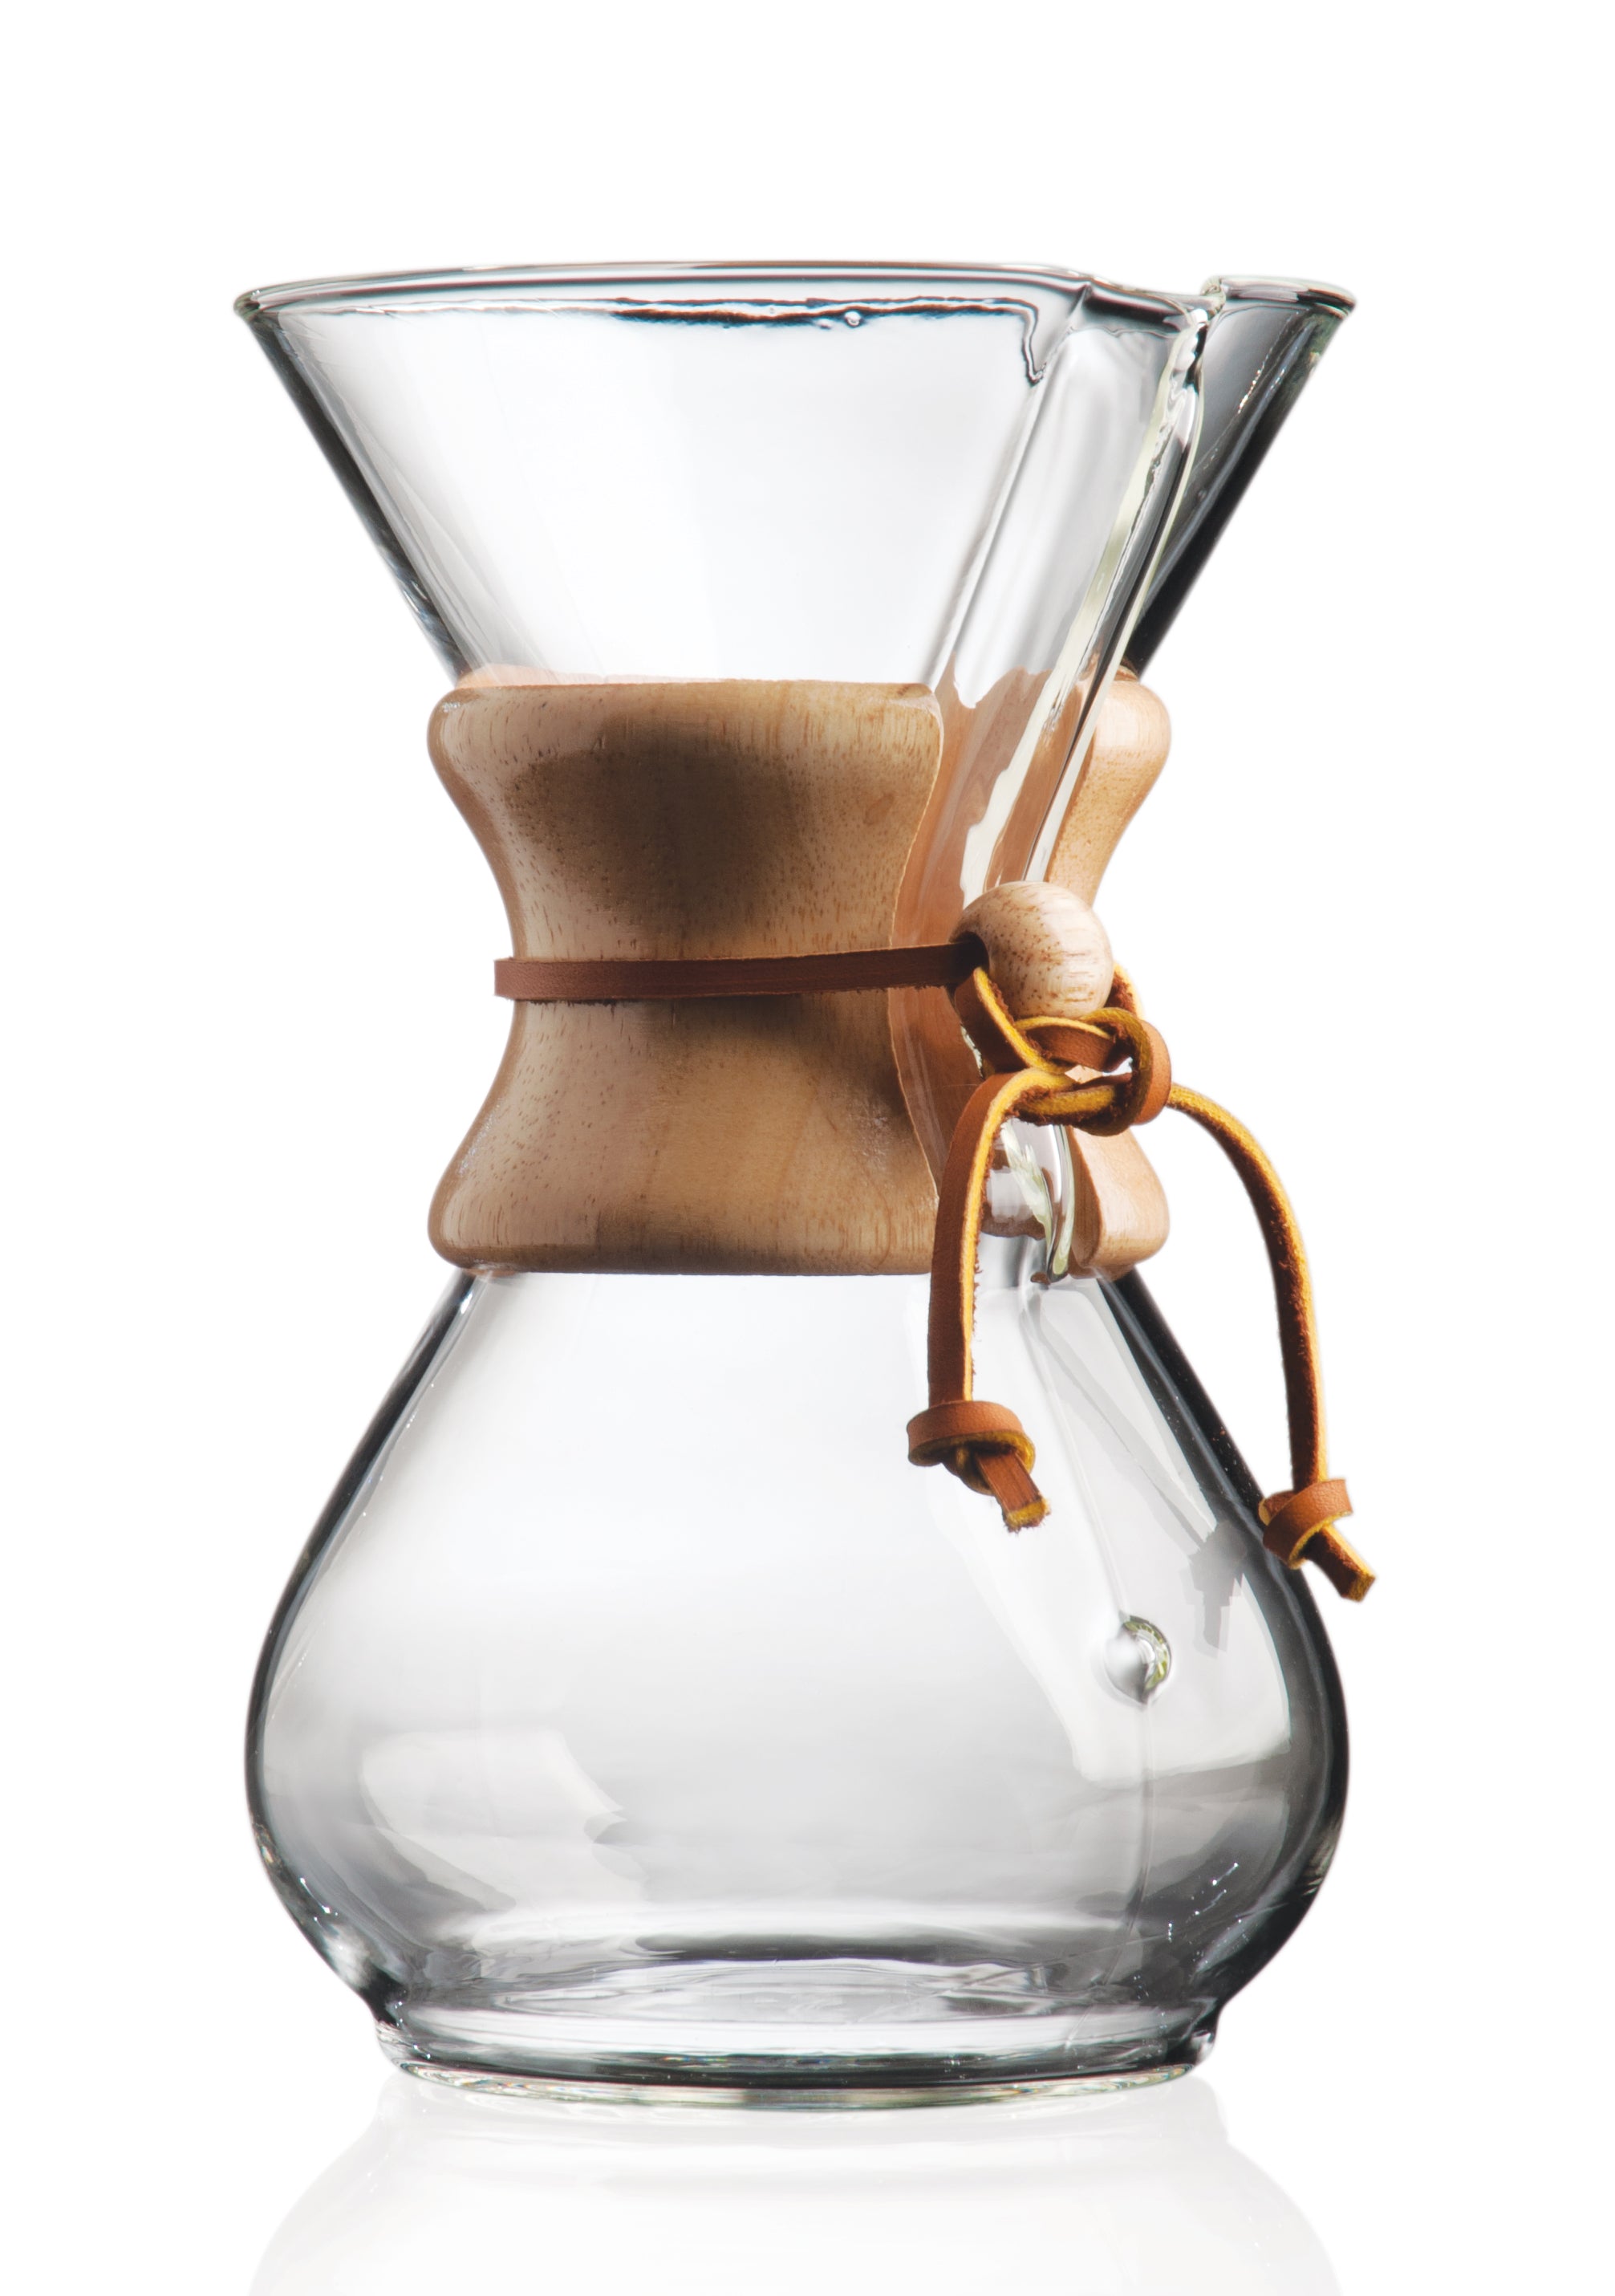 brewing process - Why is a cup of coffee not 6 oz.? - Coffee Stack Exchange